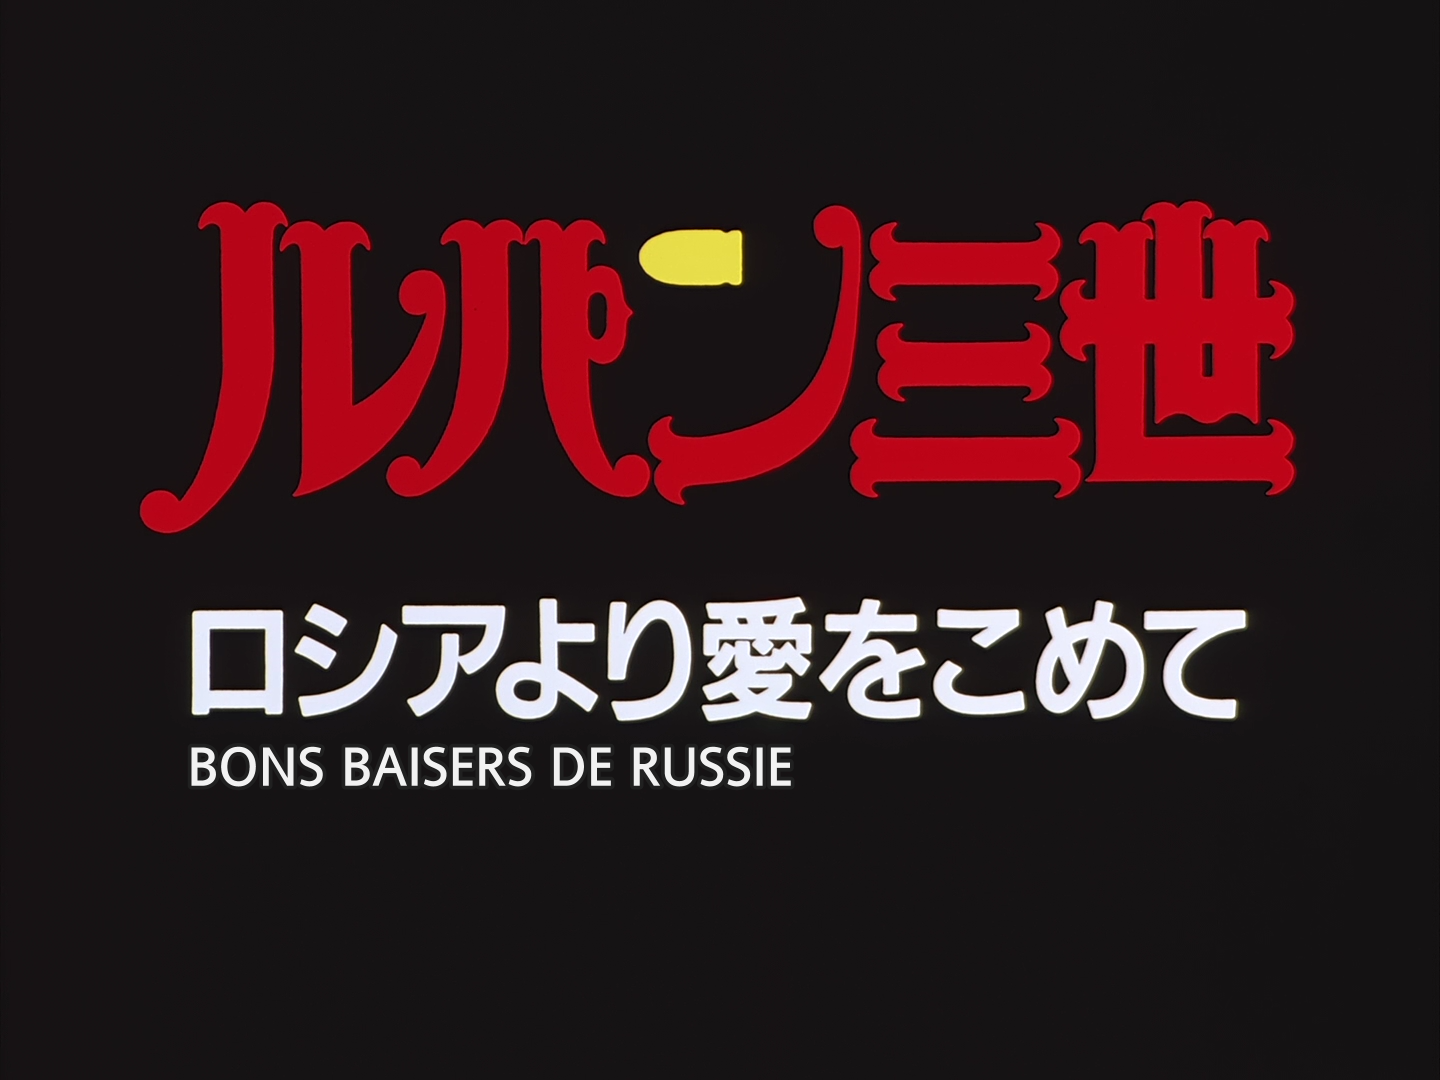 Lupin III TV-Special 04 (1992) Bons baisers de Russie - From Russia with Love VOSTFR